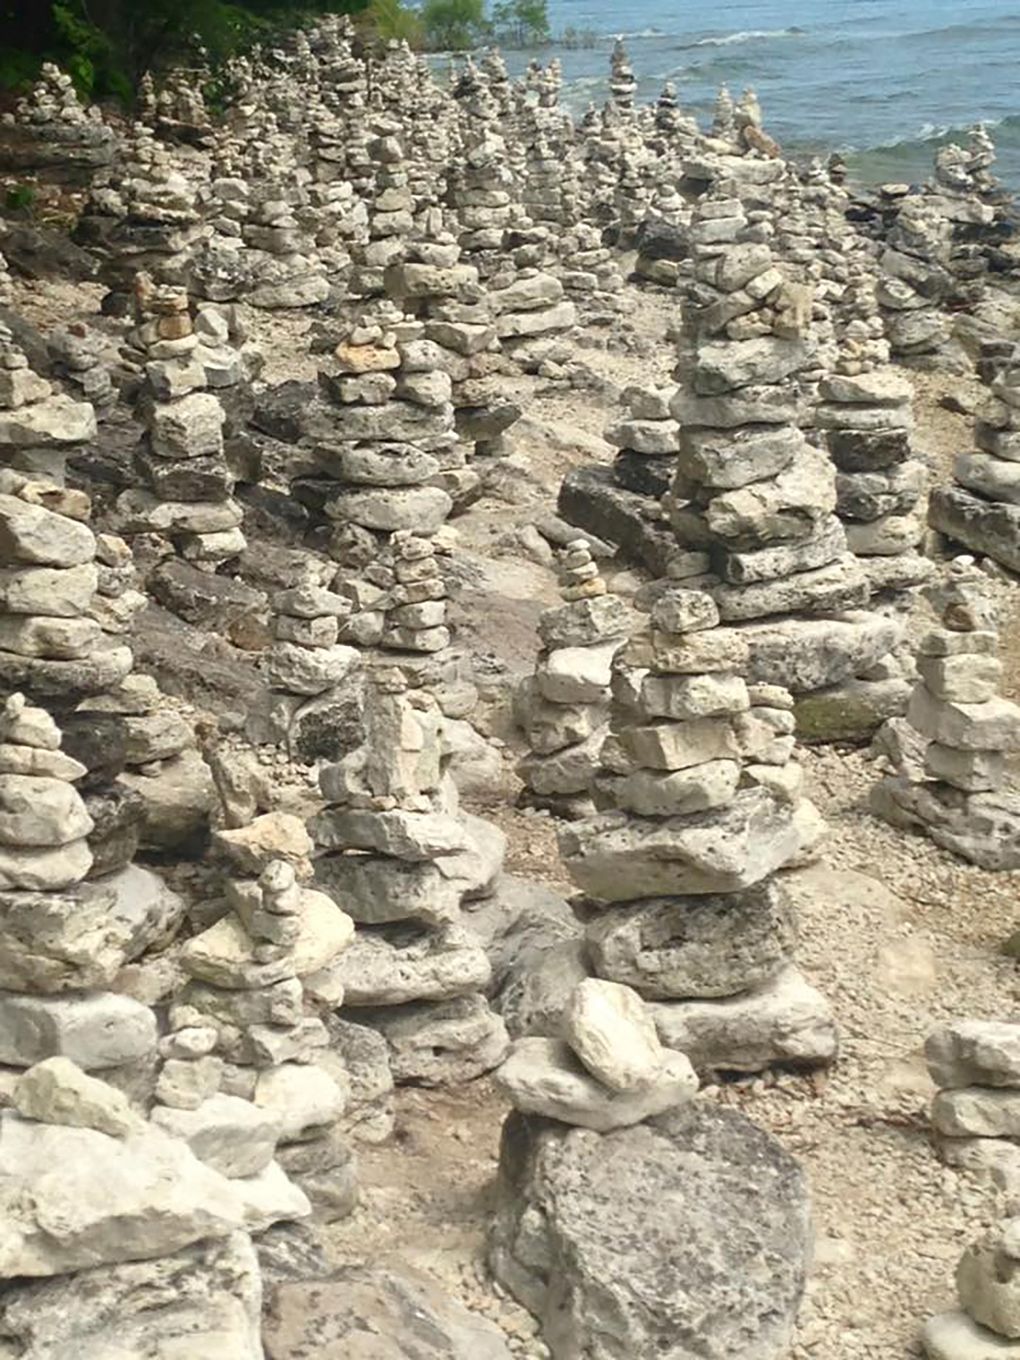 Works of art or monuments to ego? Rock-stacking stirs debate